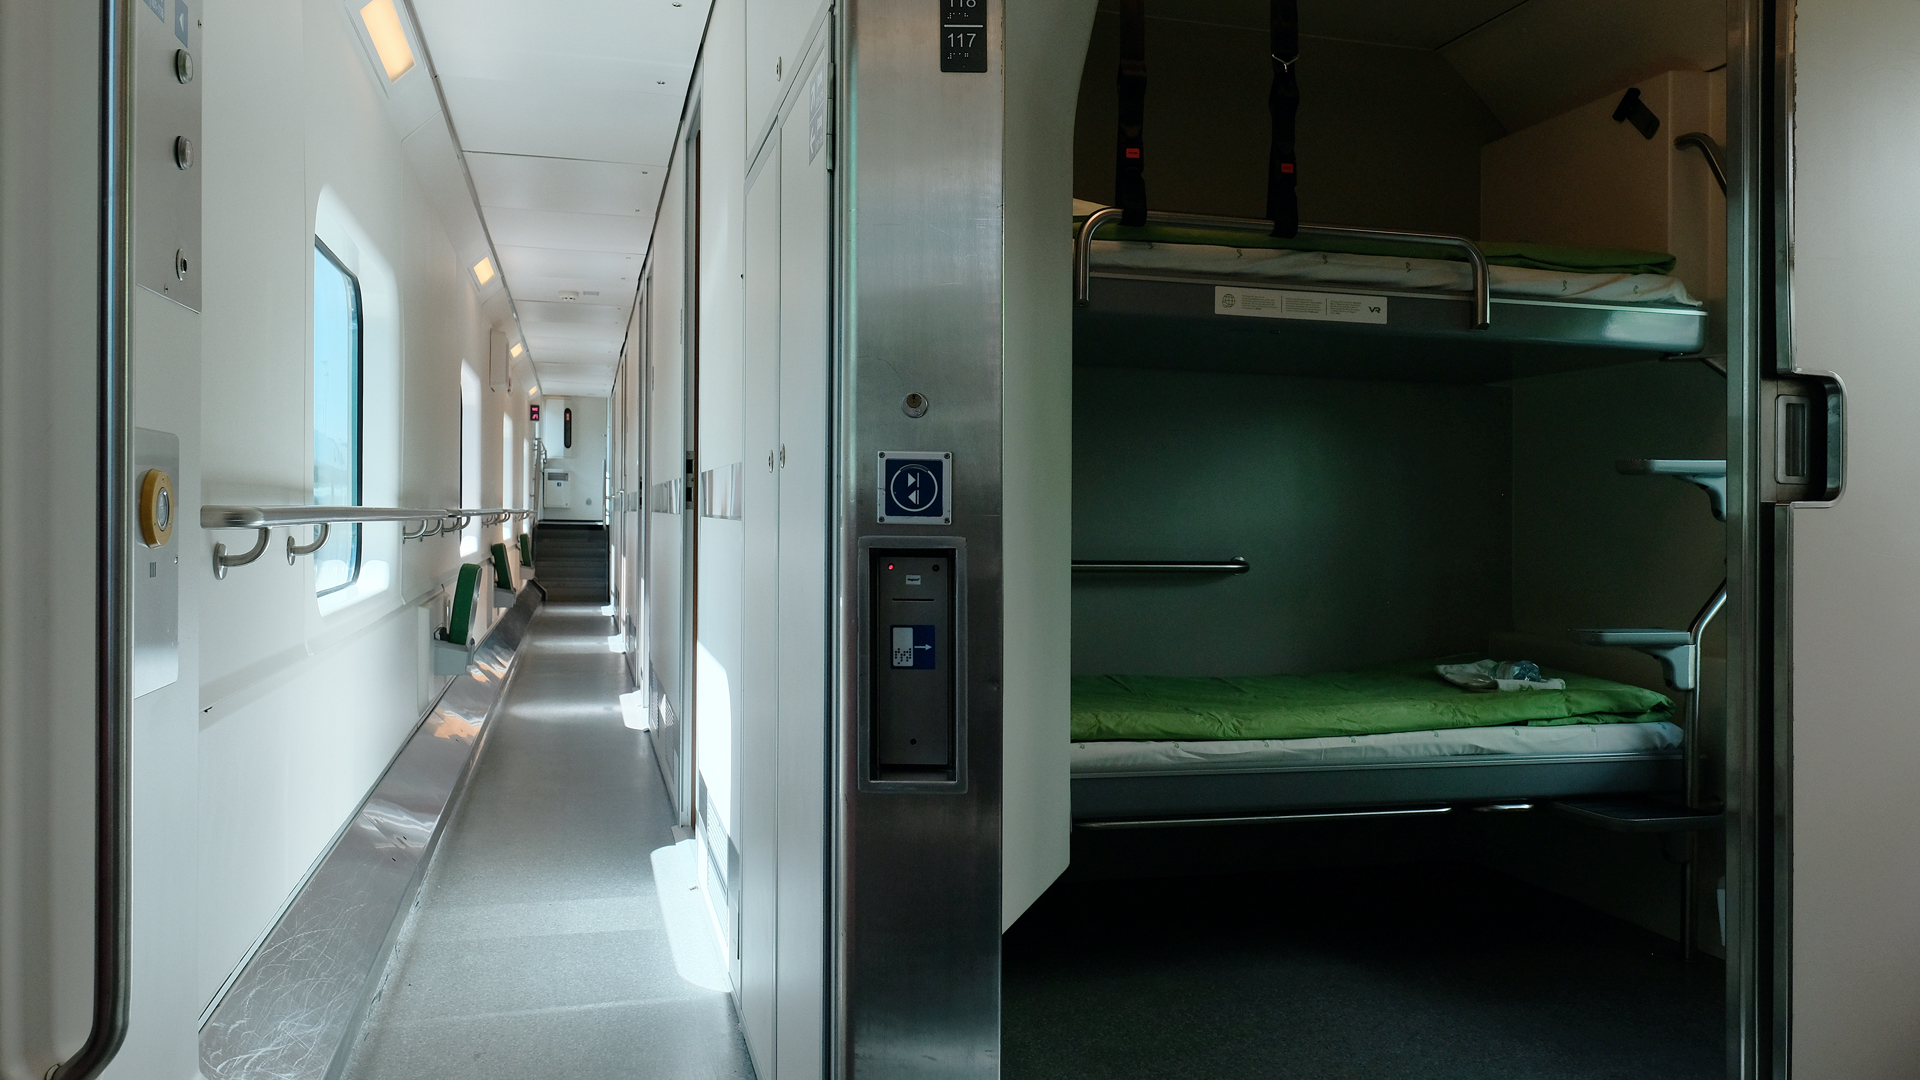 Night trains also have accessible sleeper cabins.